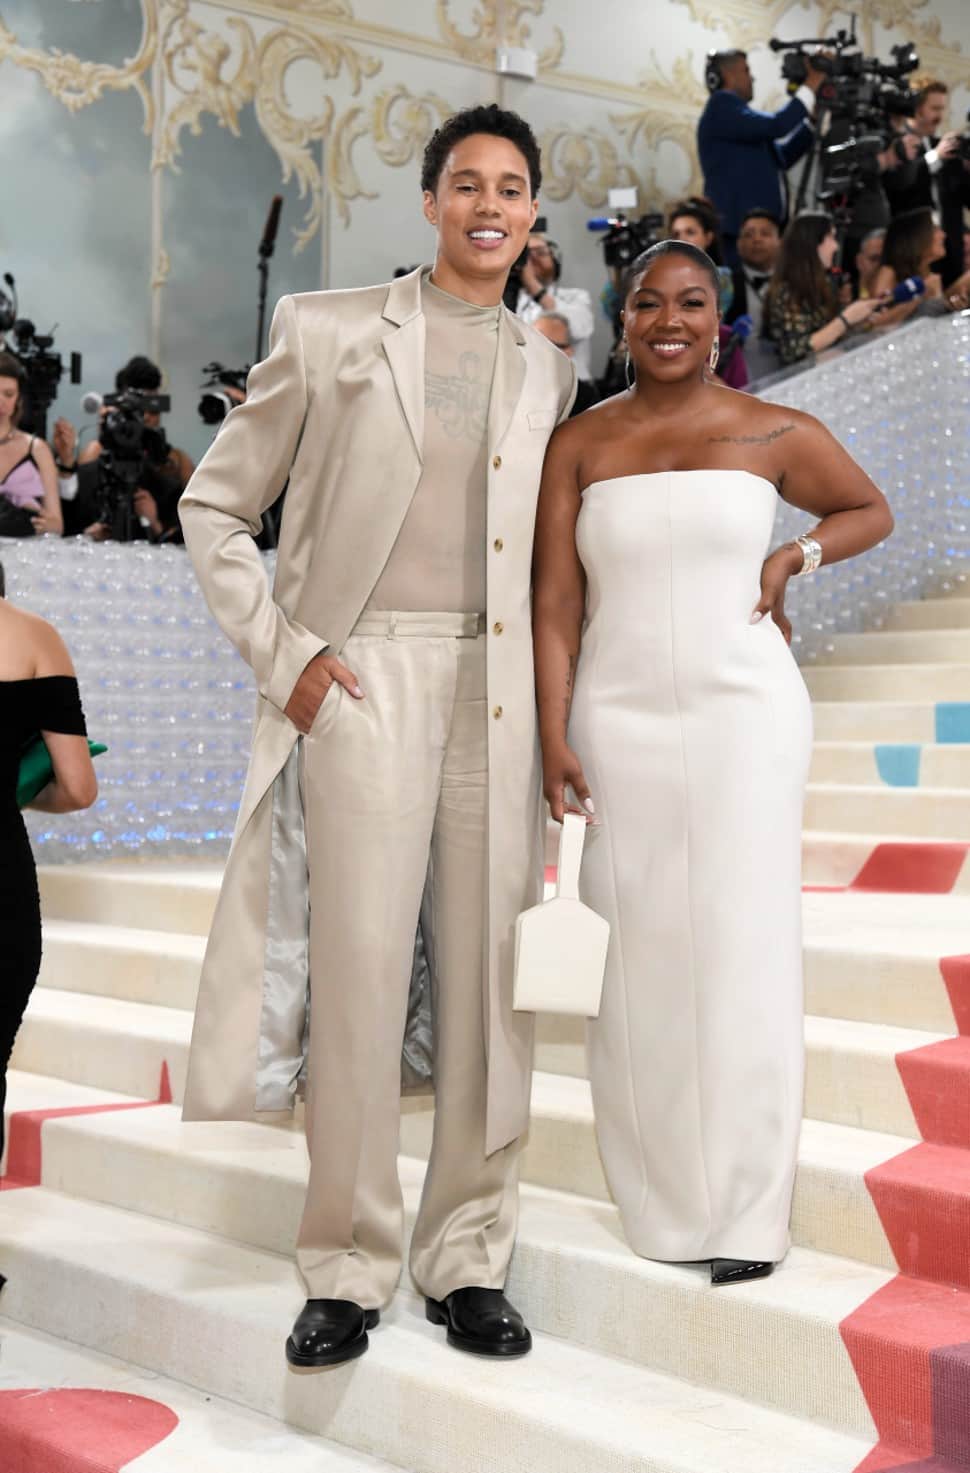 Brittney Griner became the first WNBA player to attend the Met Gala, months after being freed from Russian penal colony. She wore a tan ensemble from Calvin Klein that included tailored trousers and a long overcoat that felt cool and confident. Brittney's wife Cherelle wore a white strapless gown, also by Calvin Klein. (Photo: AP)